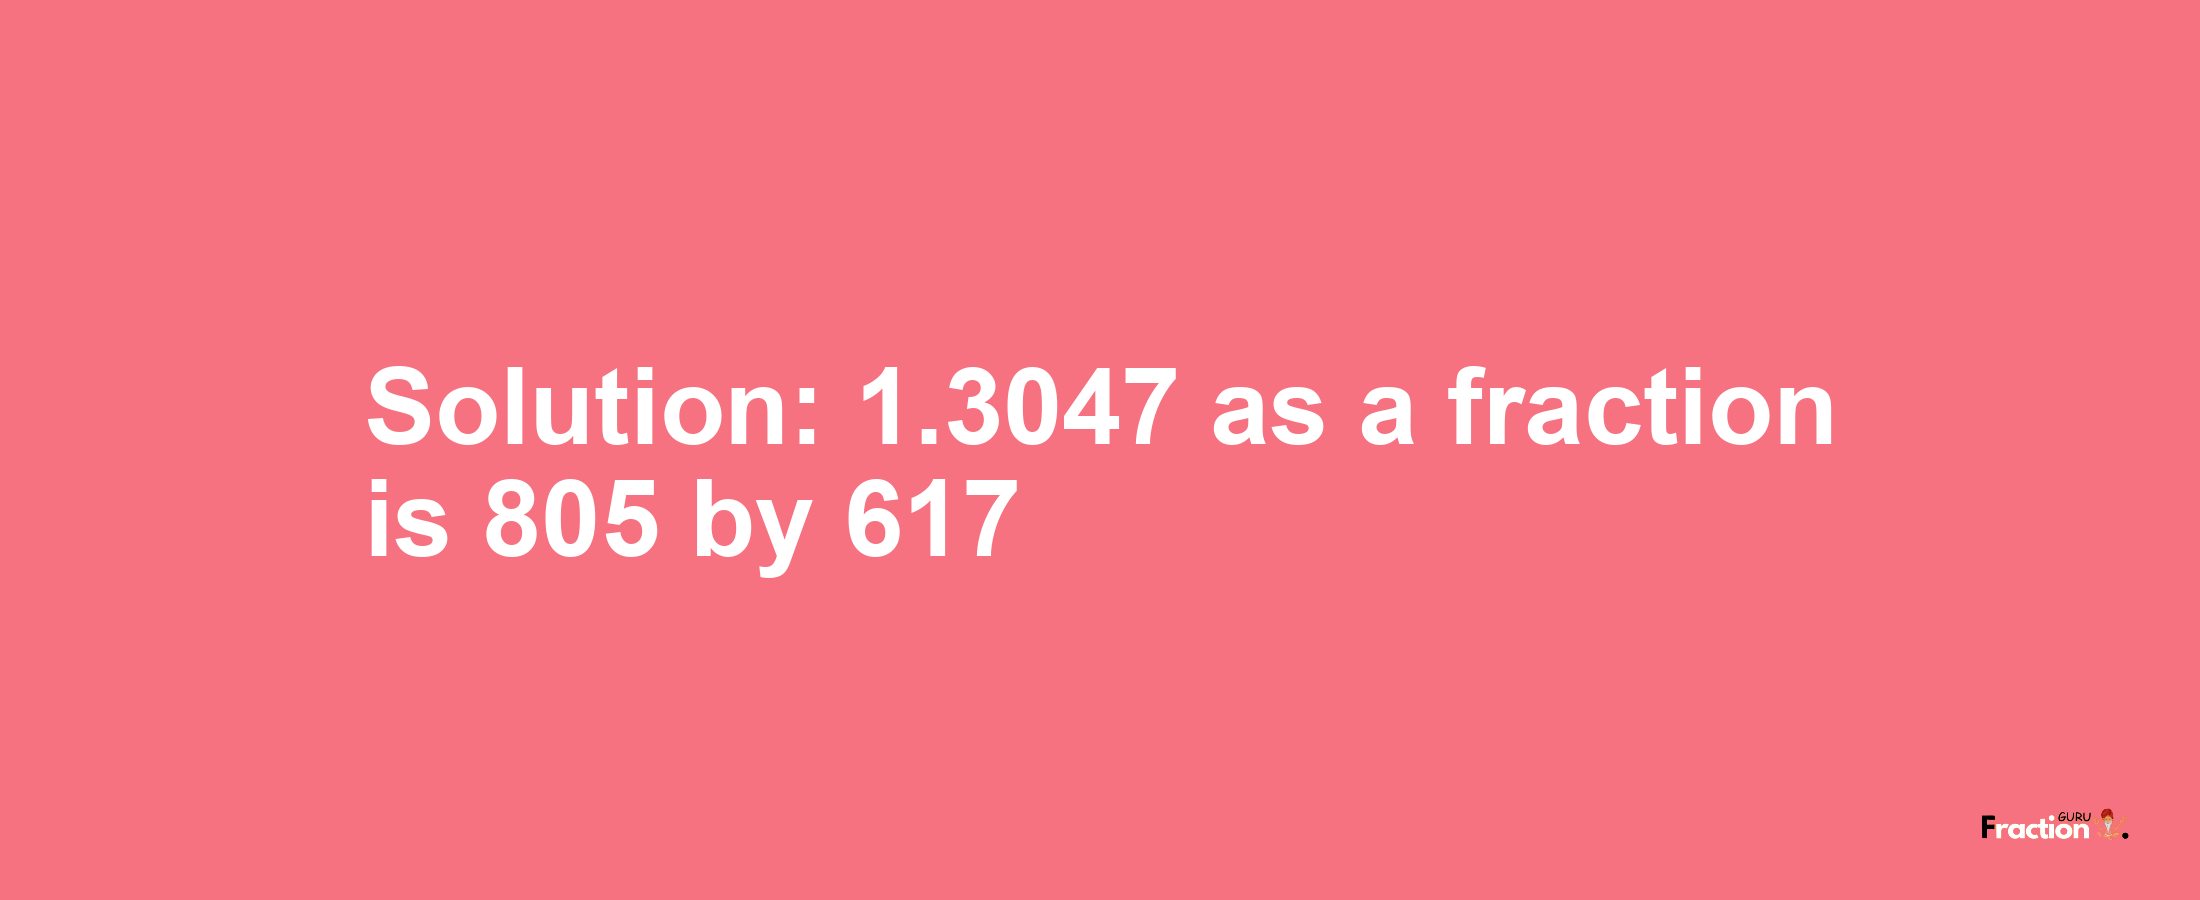 Solution:1.3047 as a fraction is 805/617